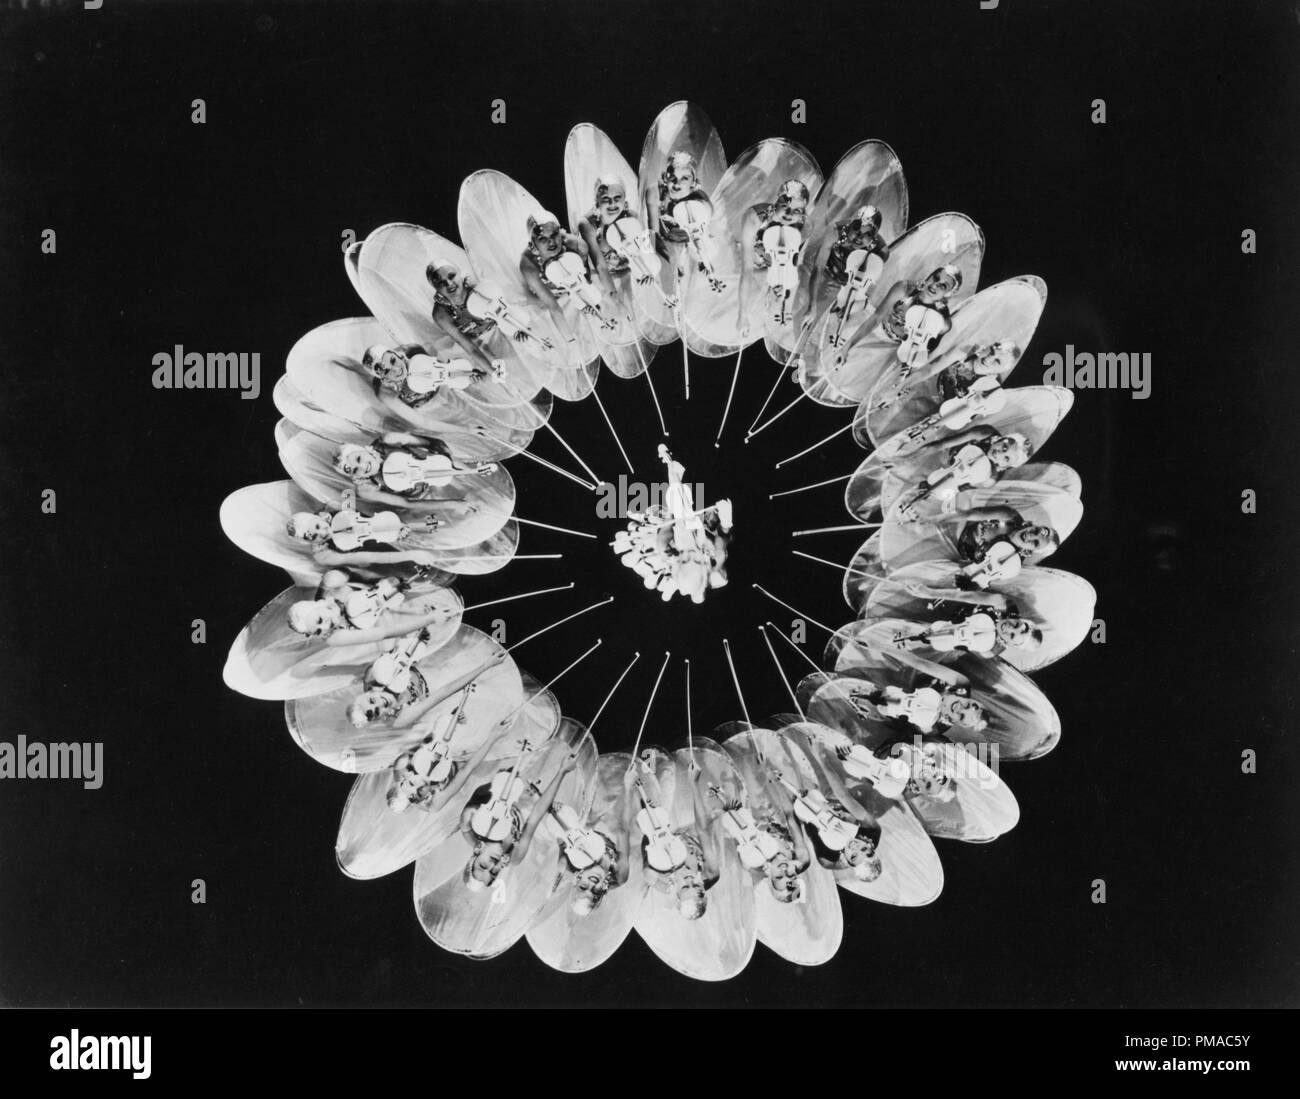 GOLD DIGGERS OF 1935 Stock Photo - Alamy